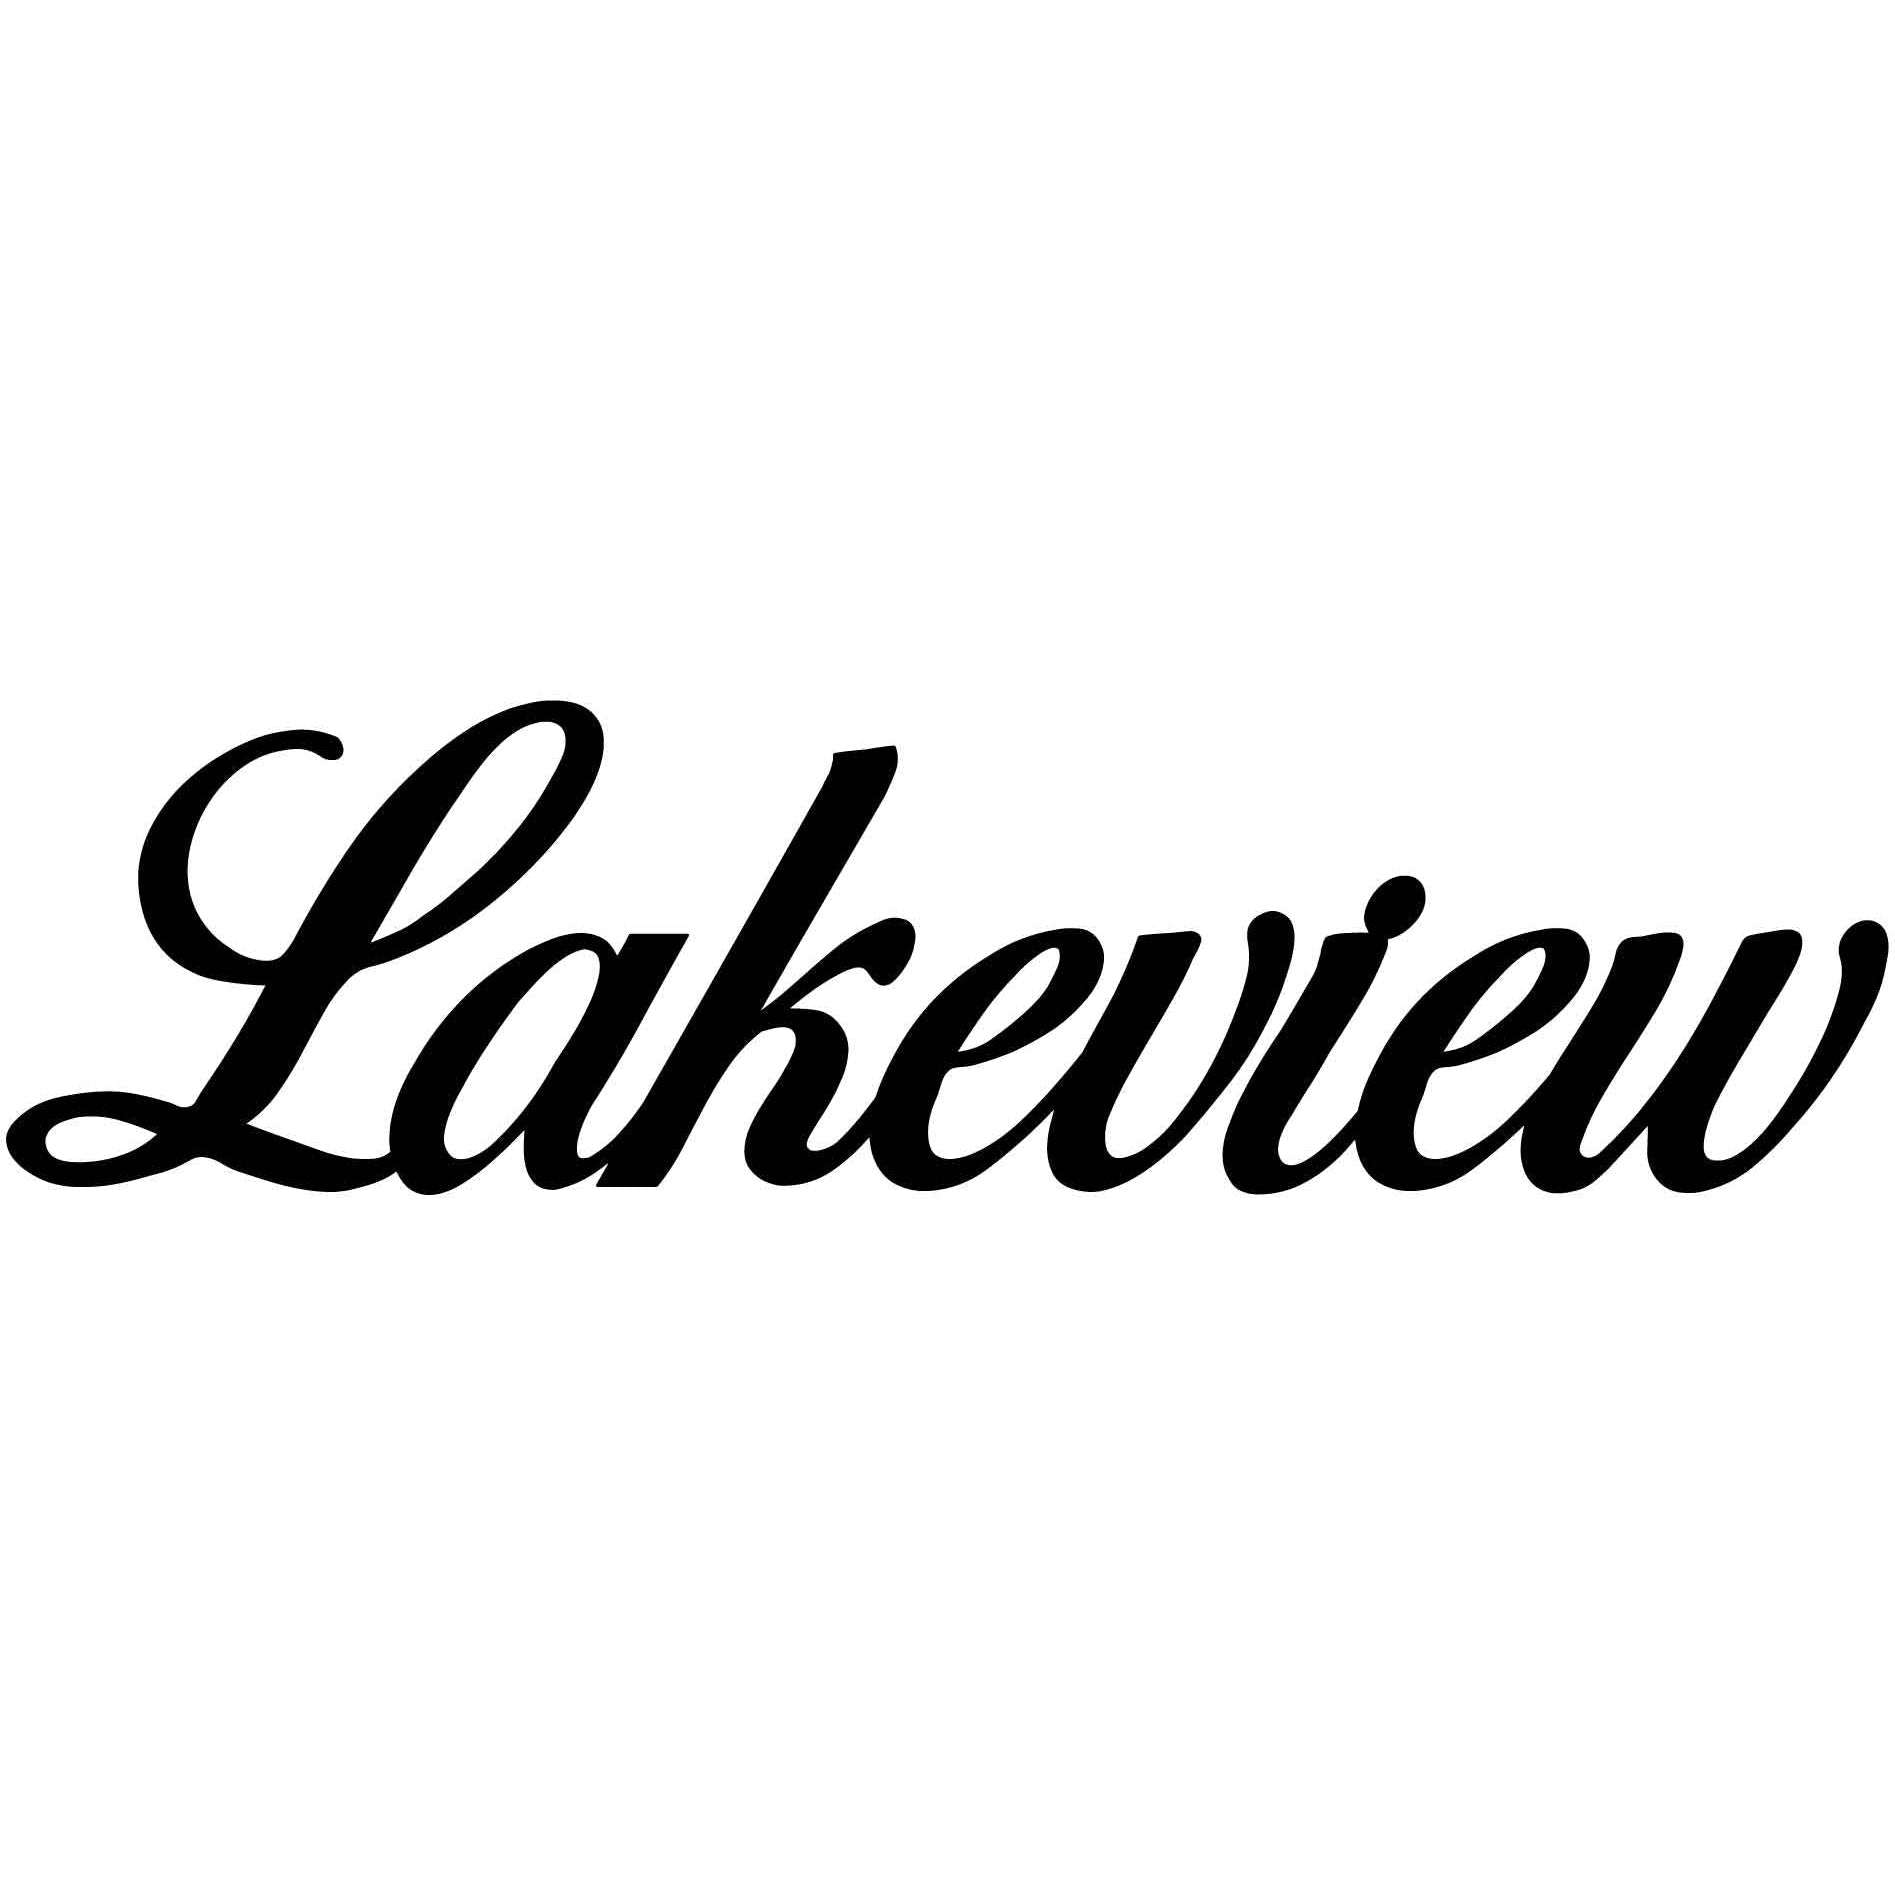 Lakeview Sign-DXF File Cut Ready for cnc machines-DXFforCNC.com